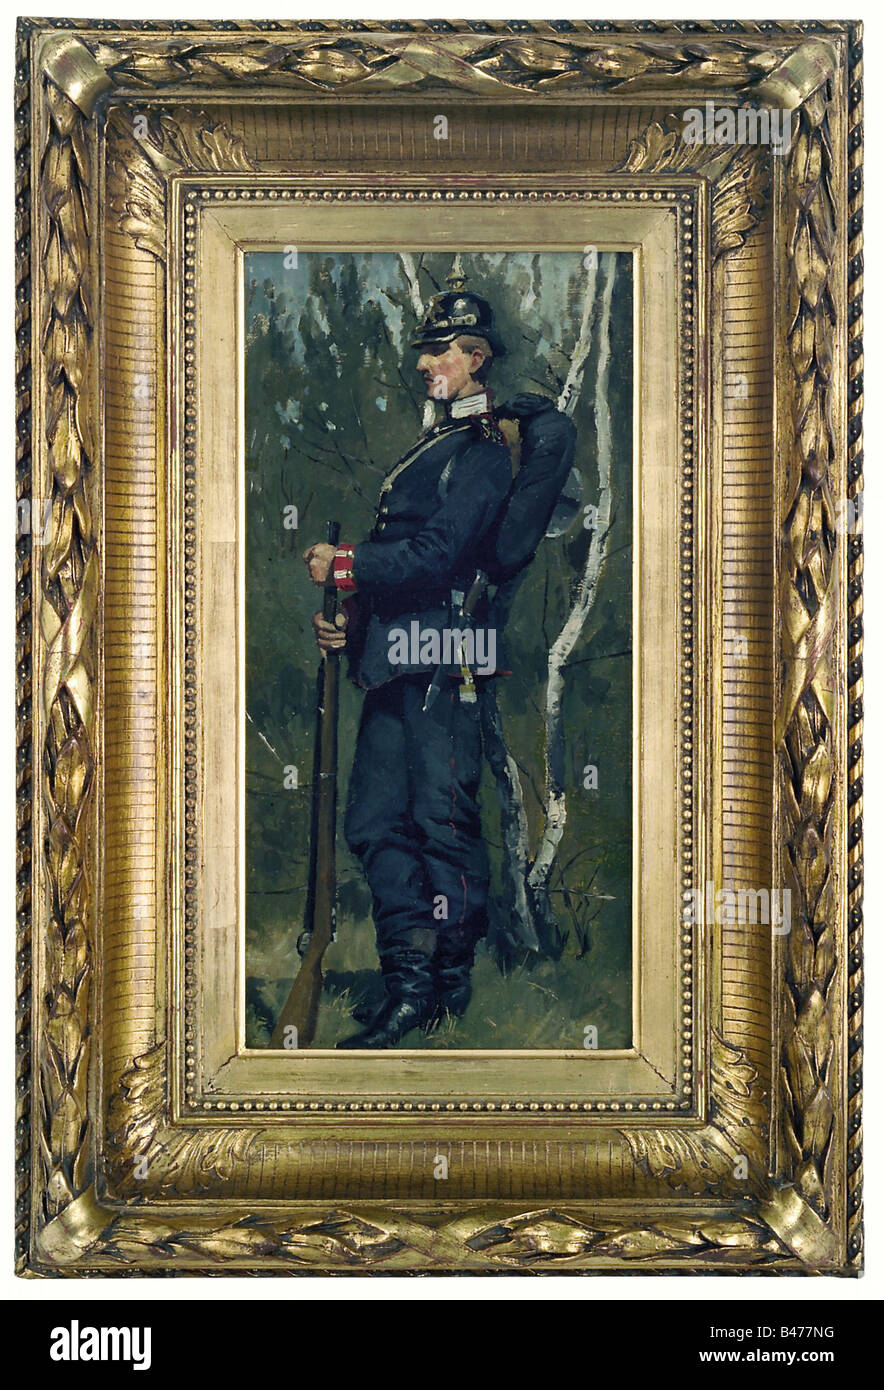 Max Hünten (1869 - 1936) - Saxon Grenadier., Oil on canvas. A grenadier with marching kit and rifle in a birch grove. Unsigned. 42 x 20.5 cm. In a heavy gilt frame, 62 x 42 cm. Max Hünten, son of the famous battle painter Emil Hünten (1827-1902), attended from 1888 alternately the Düsseldorf Academy and the Julian Academy in Paris and is known for his historical, genre, military and hunting scenes. He exhibited at the Düsseldorf Exhibition, the Greater Berlin Art Exhibition, and the Munich Glass Palace. fine arts, people, 19th century, Saxony, Sa, Additional-Rights-Clearance-Info-Not-Available Stock Photo